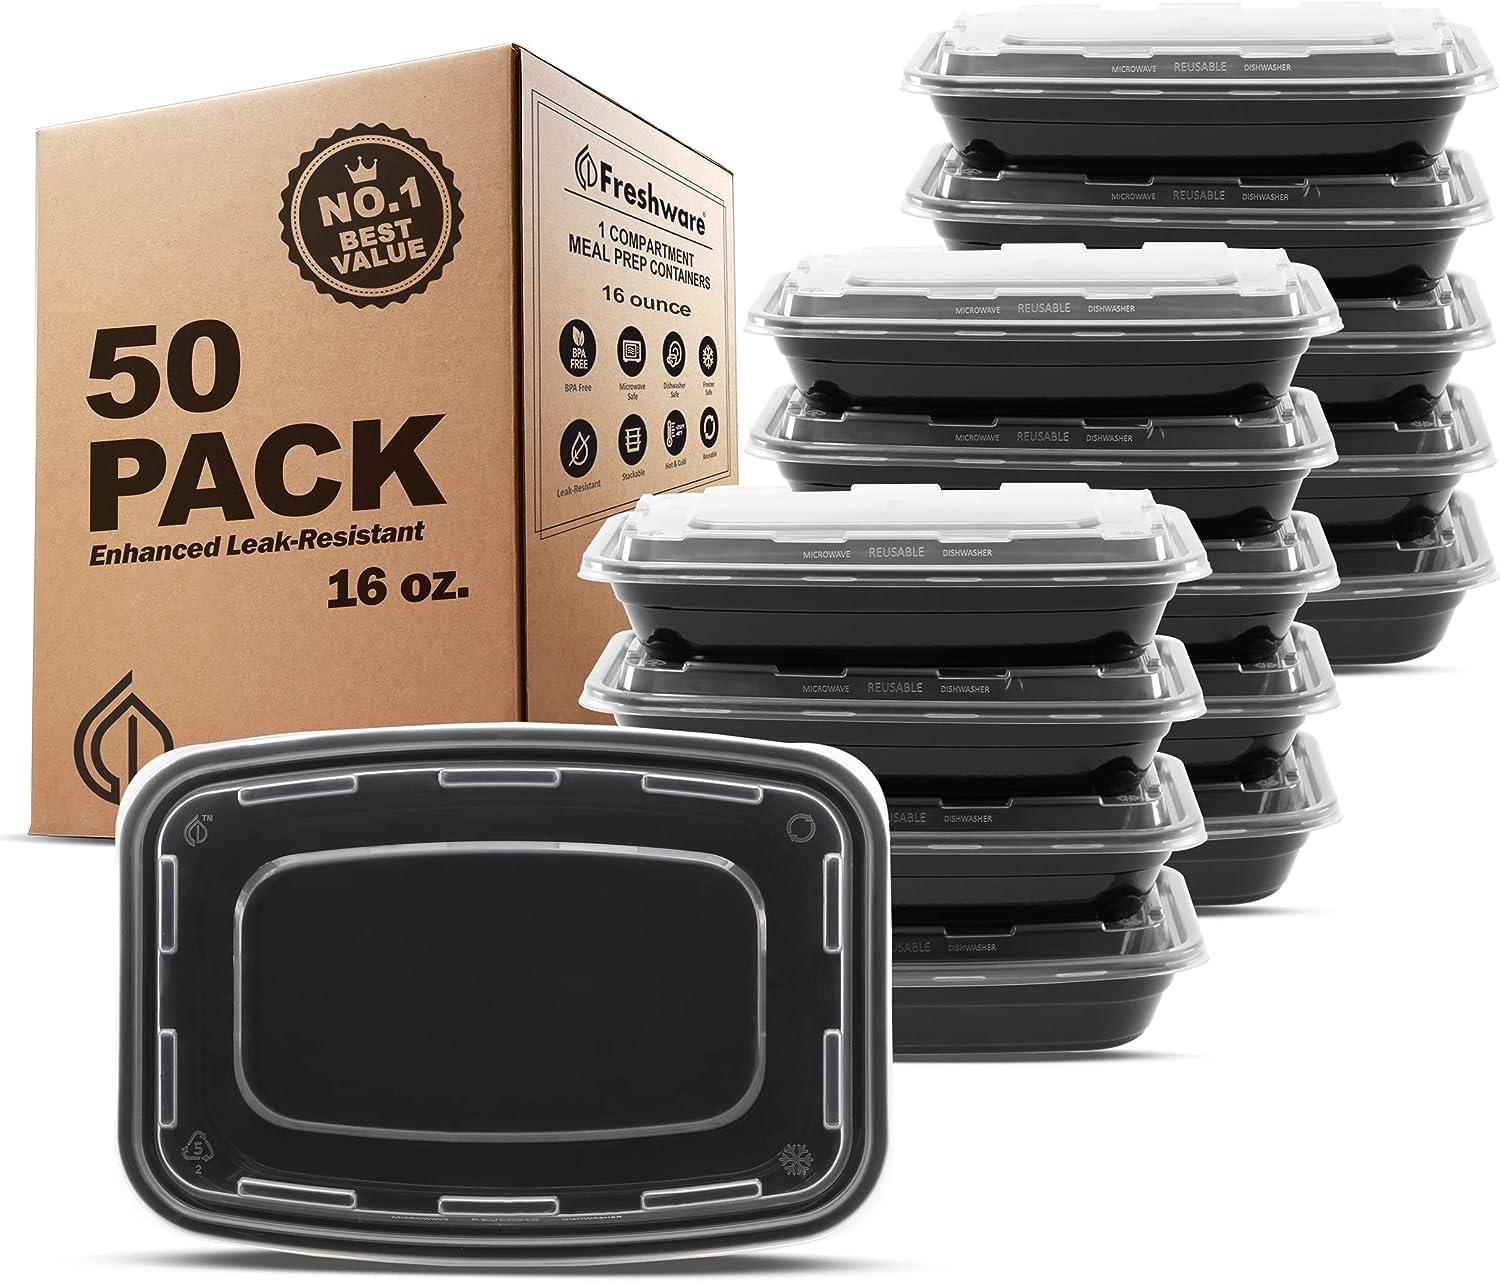 Freshware Meal Prep Containers 1 Compartment with Lids 50 Pack for $14.71